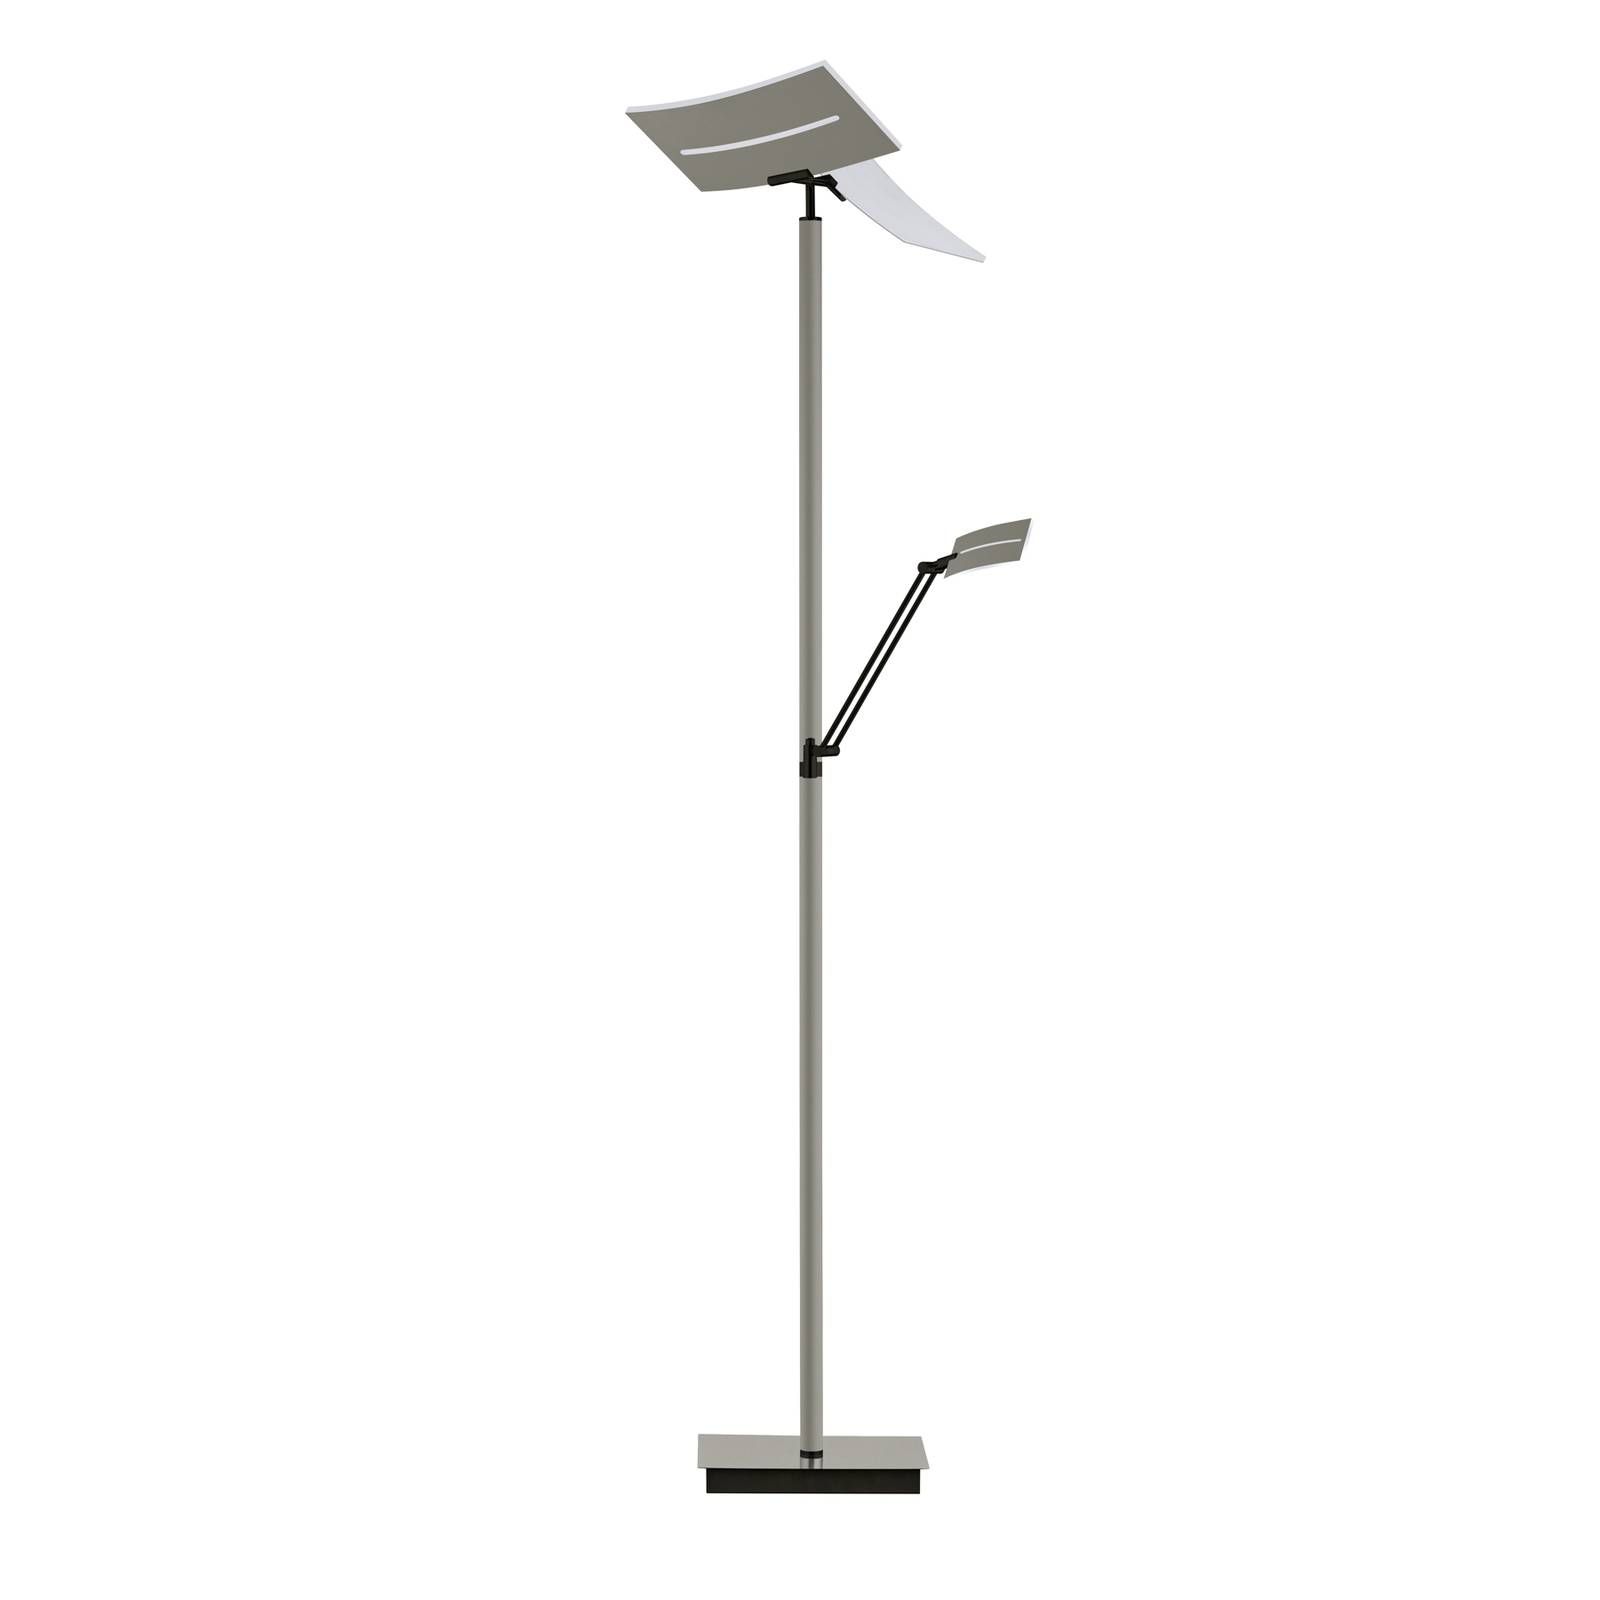 HELL LED-Stehlampe Evolo CCT mit Leselicht, taupe